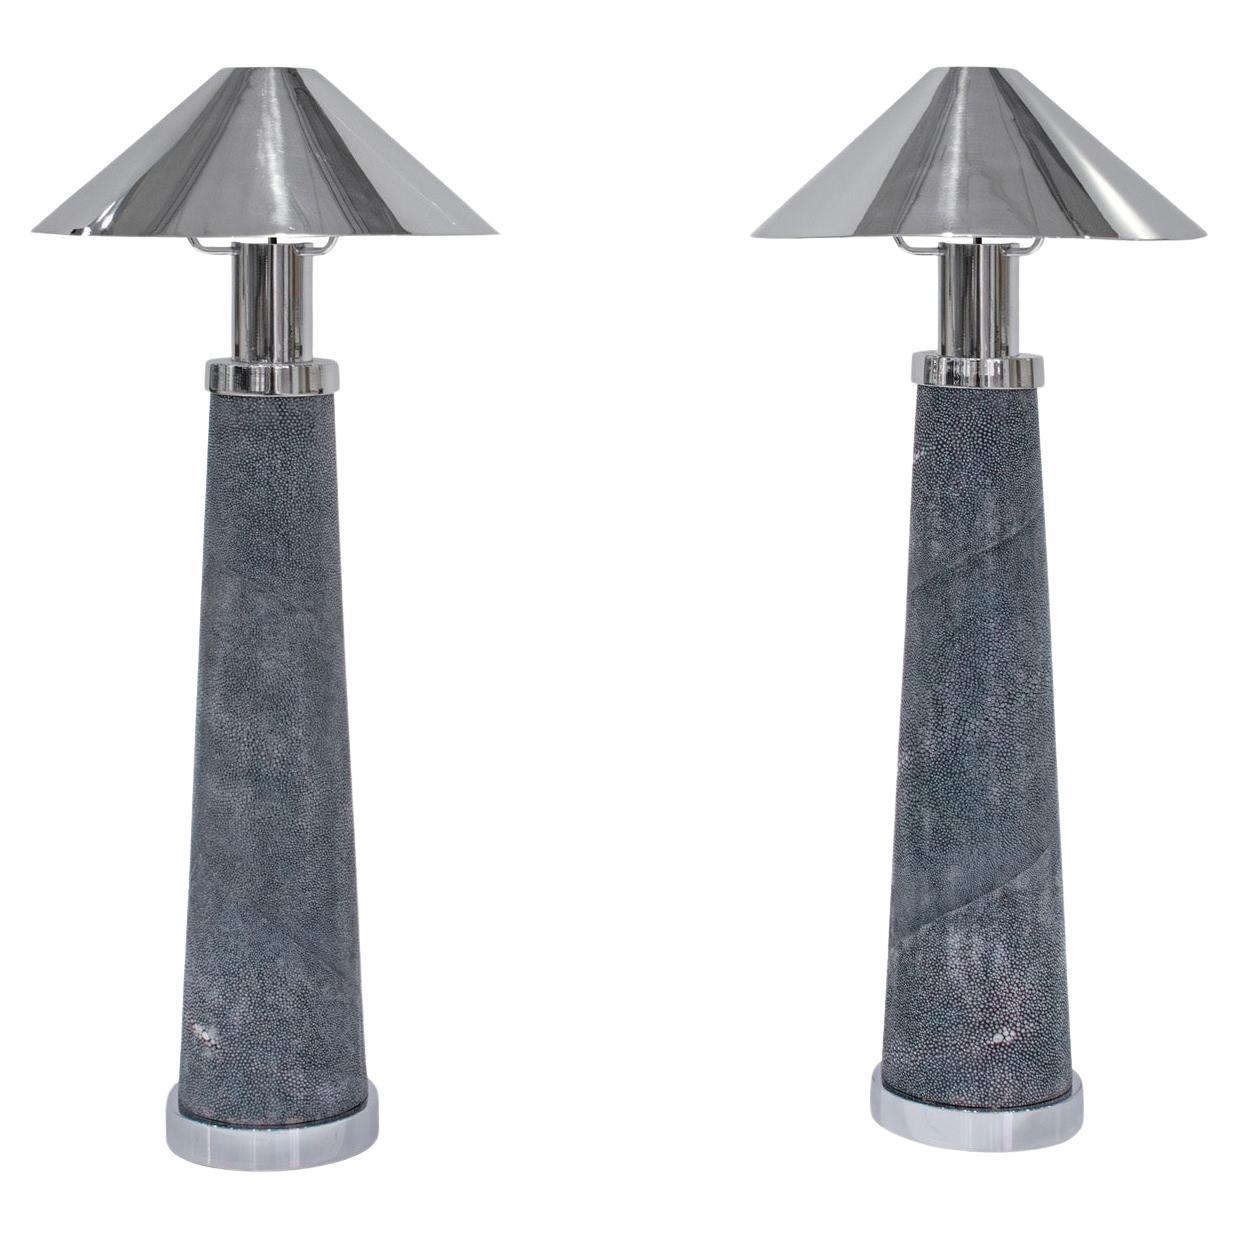 Karl Springer Rare Pair of "Lighthouse Lamps" in Blue Shagreen and Nickel 1980s For Sale